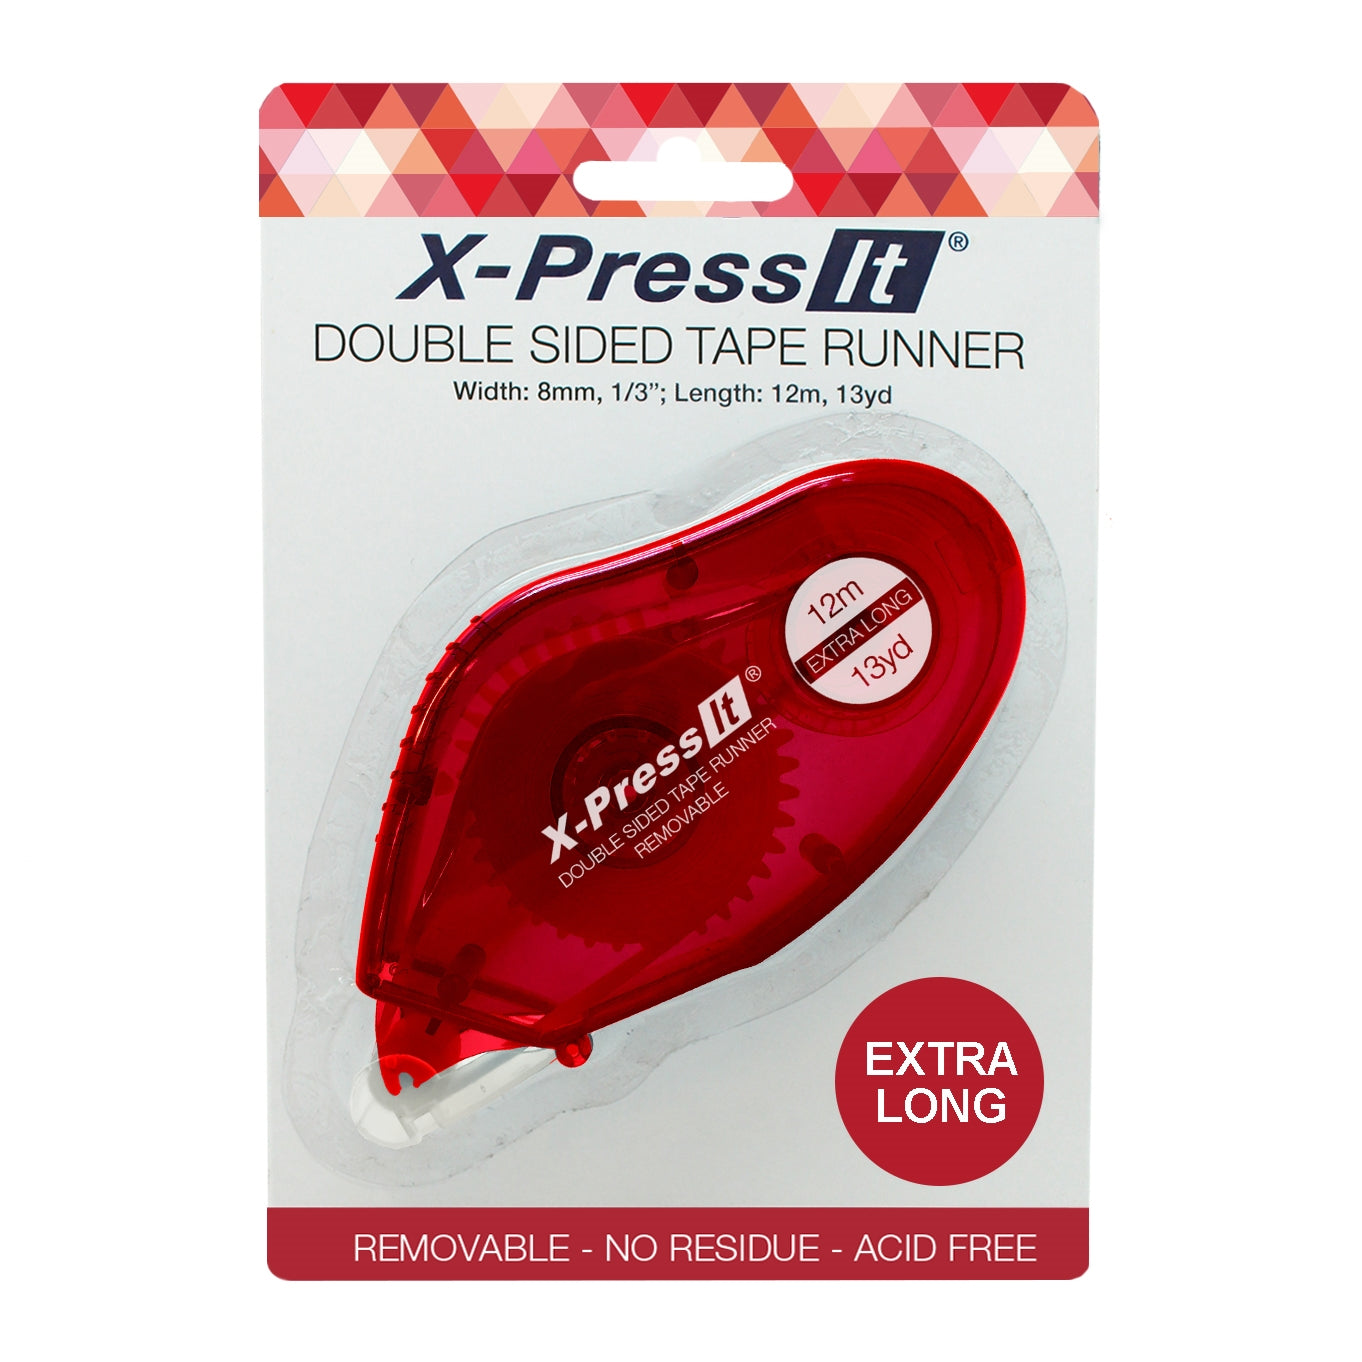 X-Press It Double Sided Tape Runner 8mm x 12m Removable - CRAFT2U